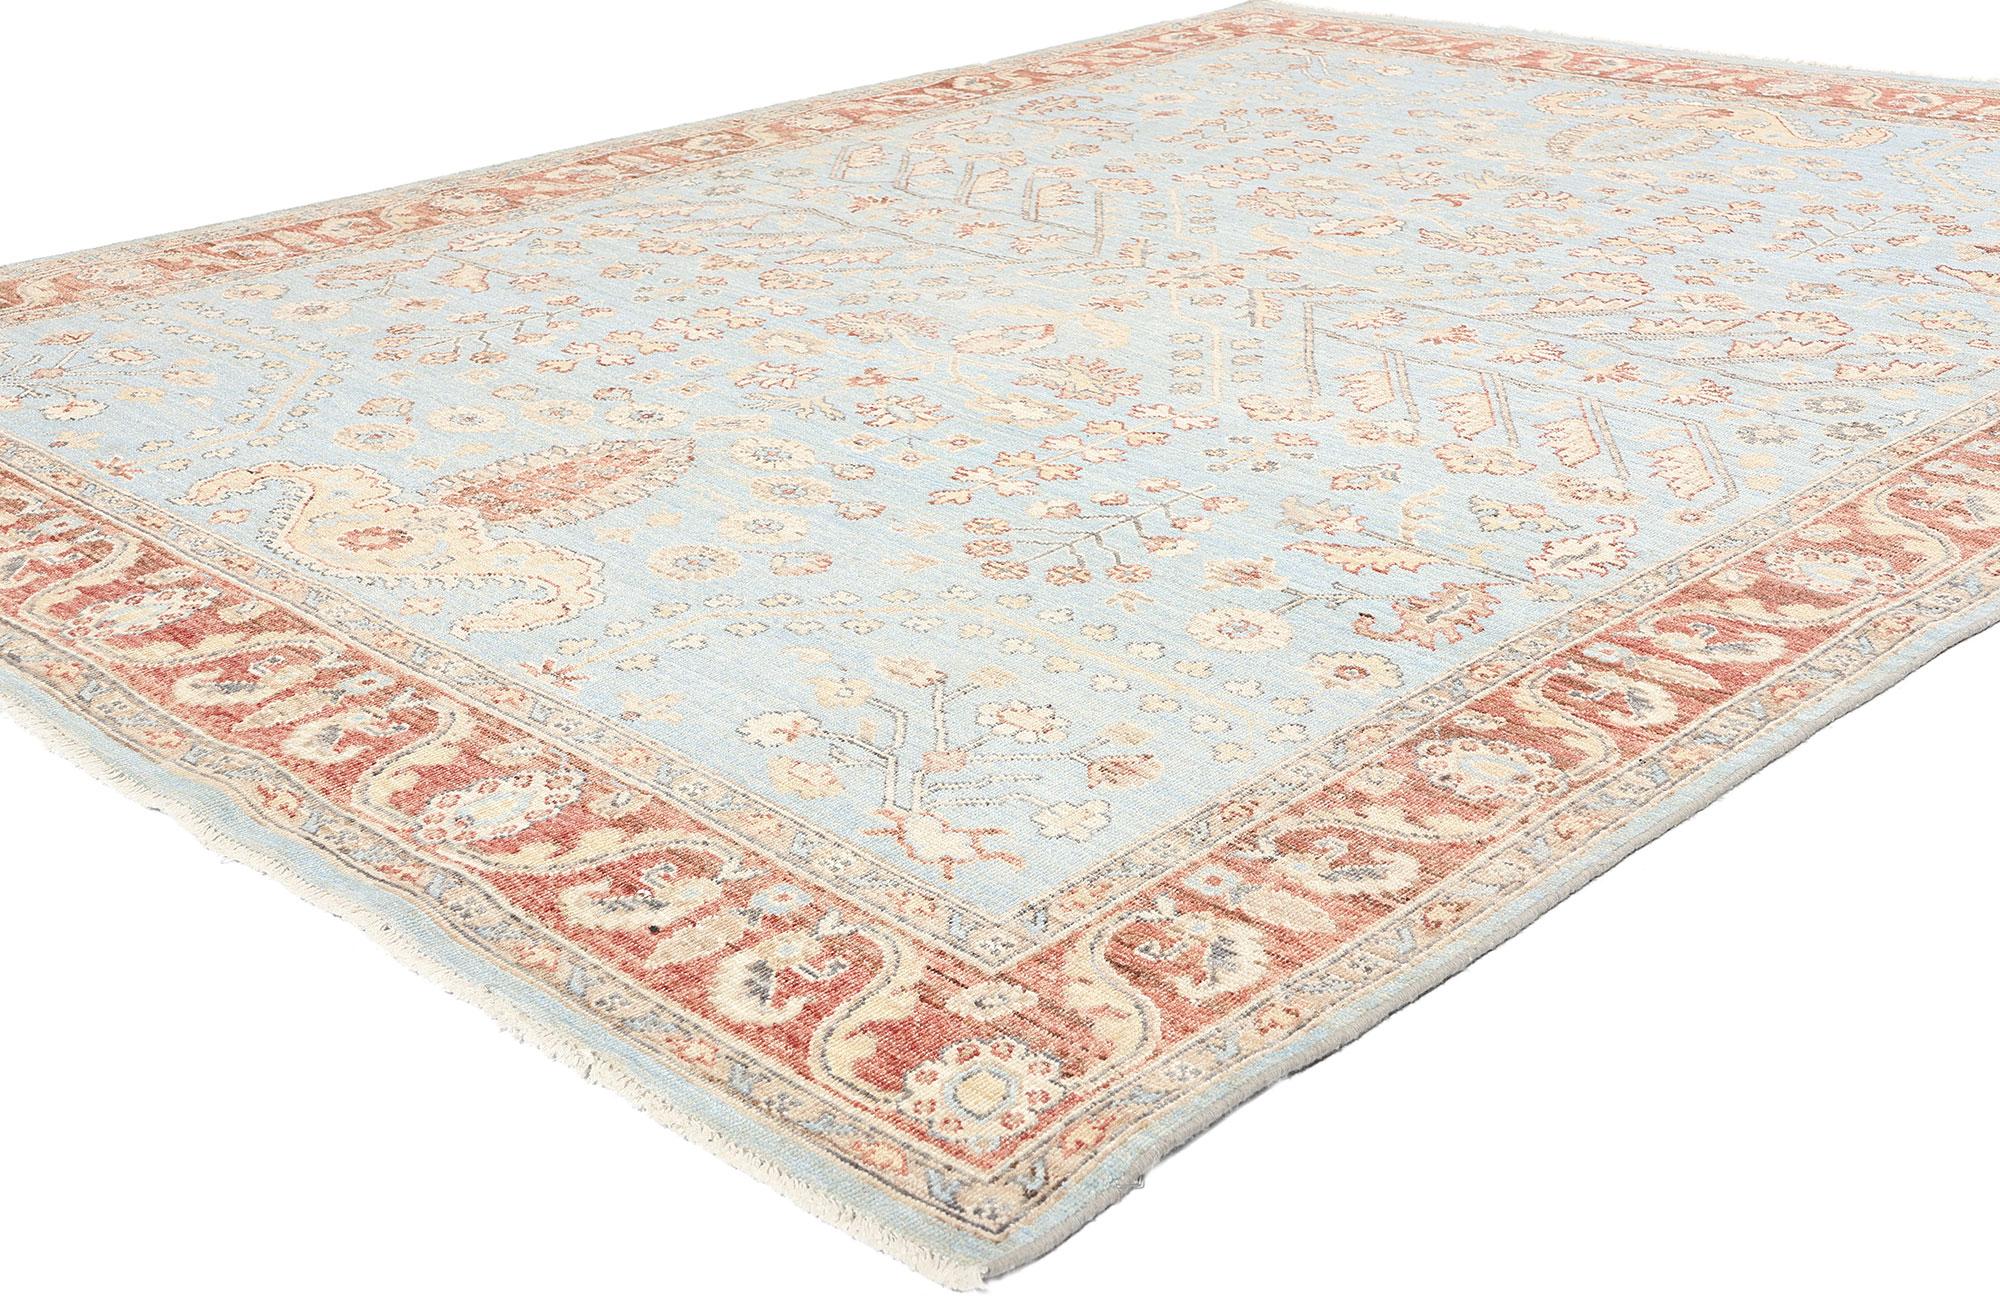 81114 Modern Light Blue Sultanabad Rug with Tree of Life Design, 07'09 x 10'00. Pakistani Sultanabad rugs are exquisite handcrafted creations originating from Pakistan and inspired by the traditional designs of Sultanabad rugs from Persia. Renowned